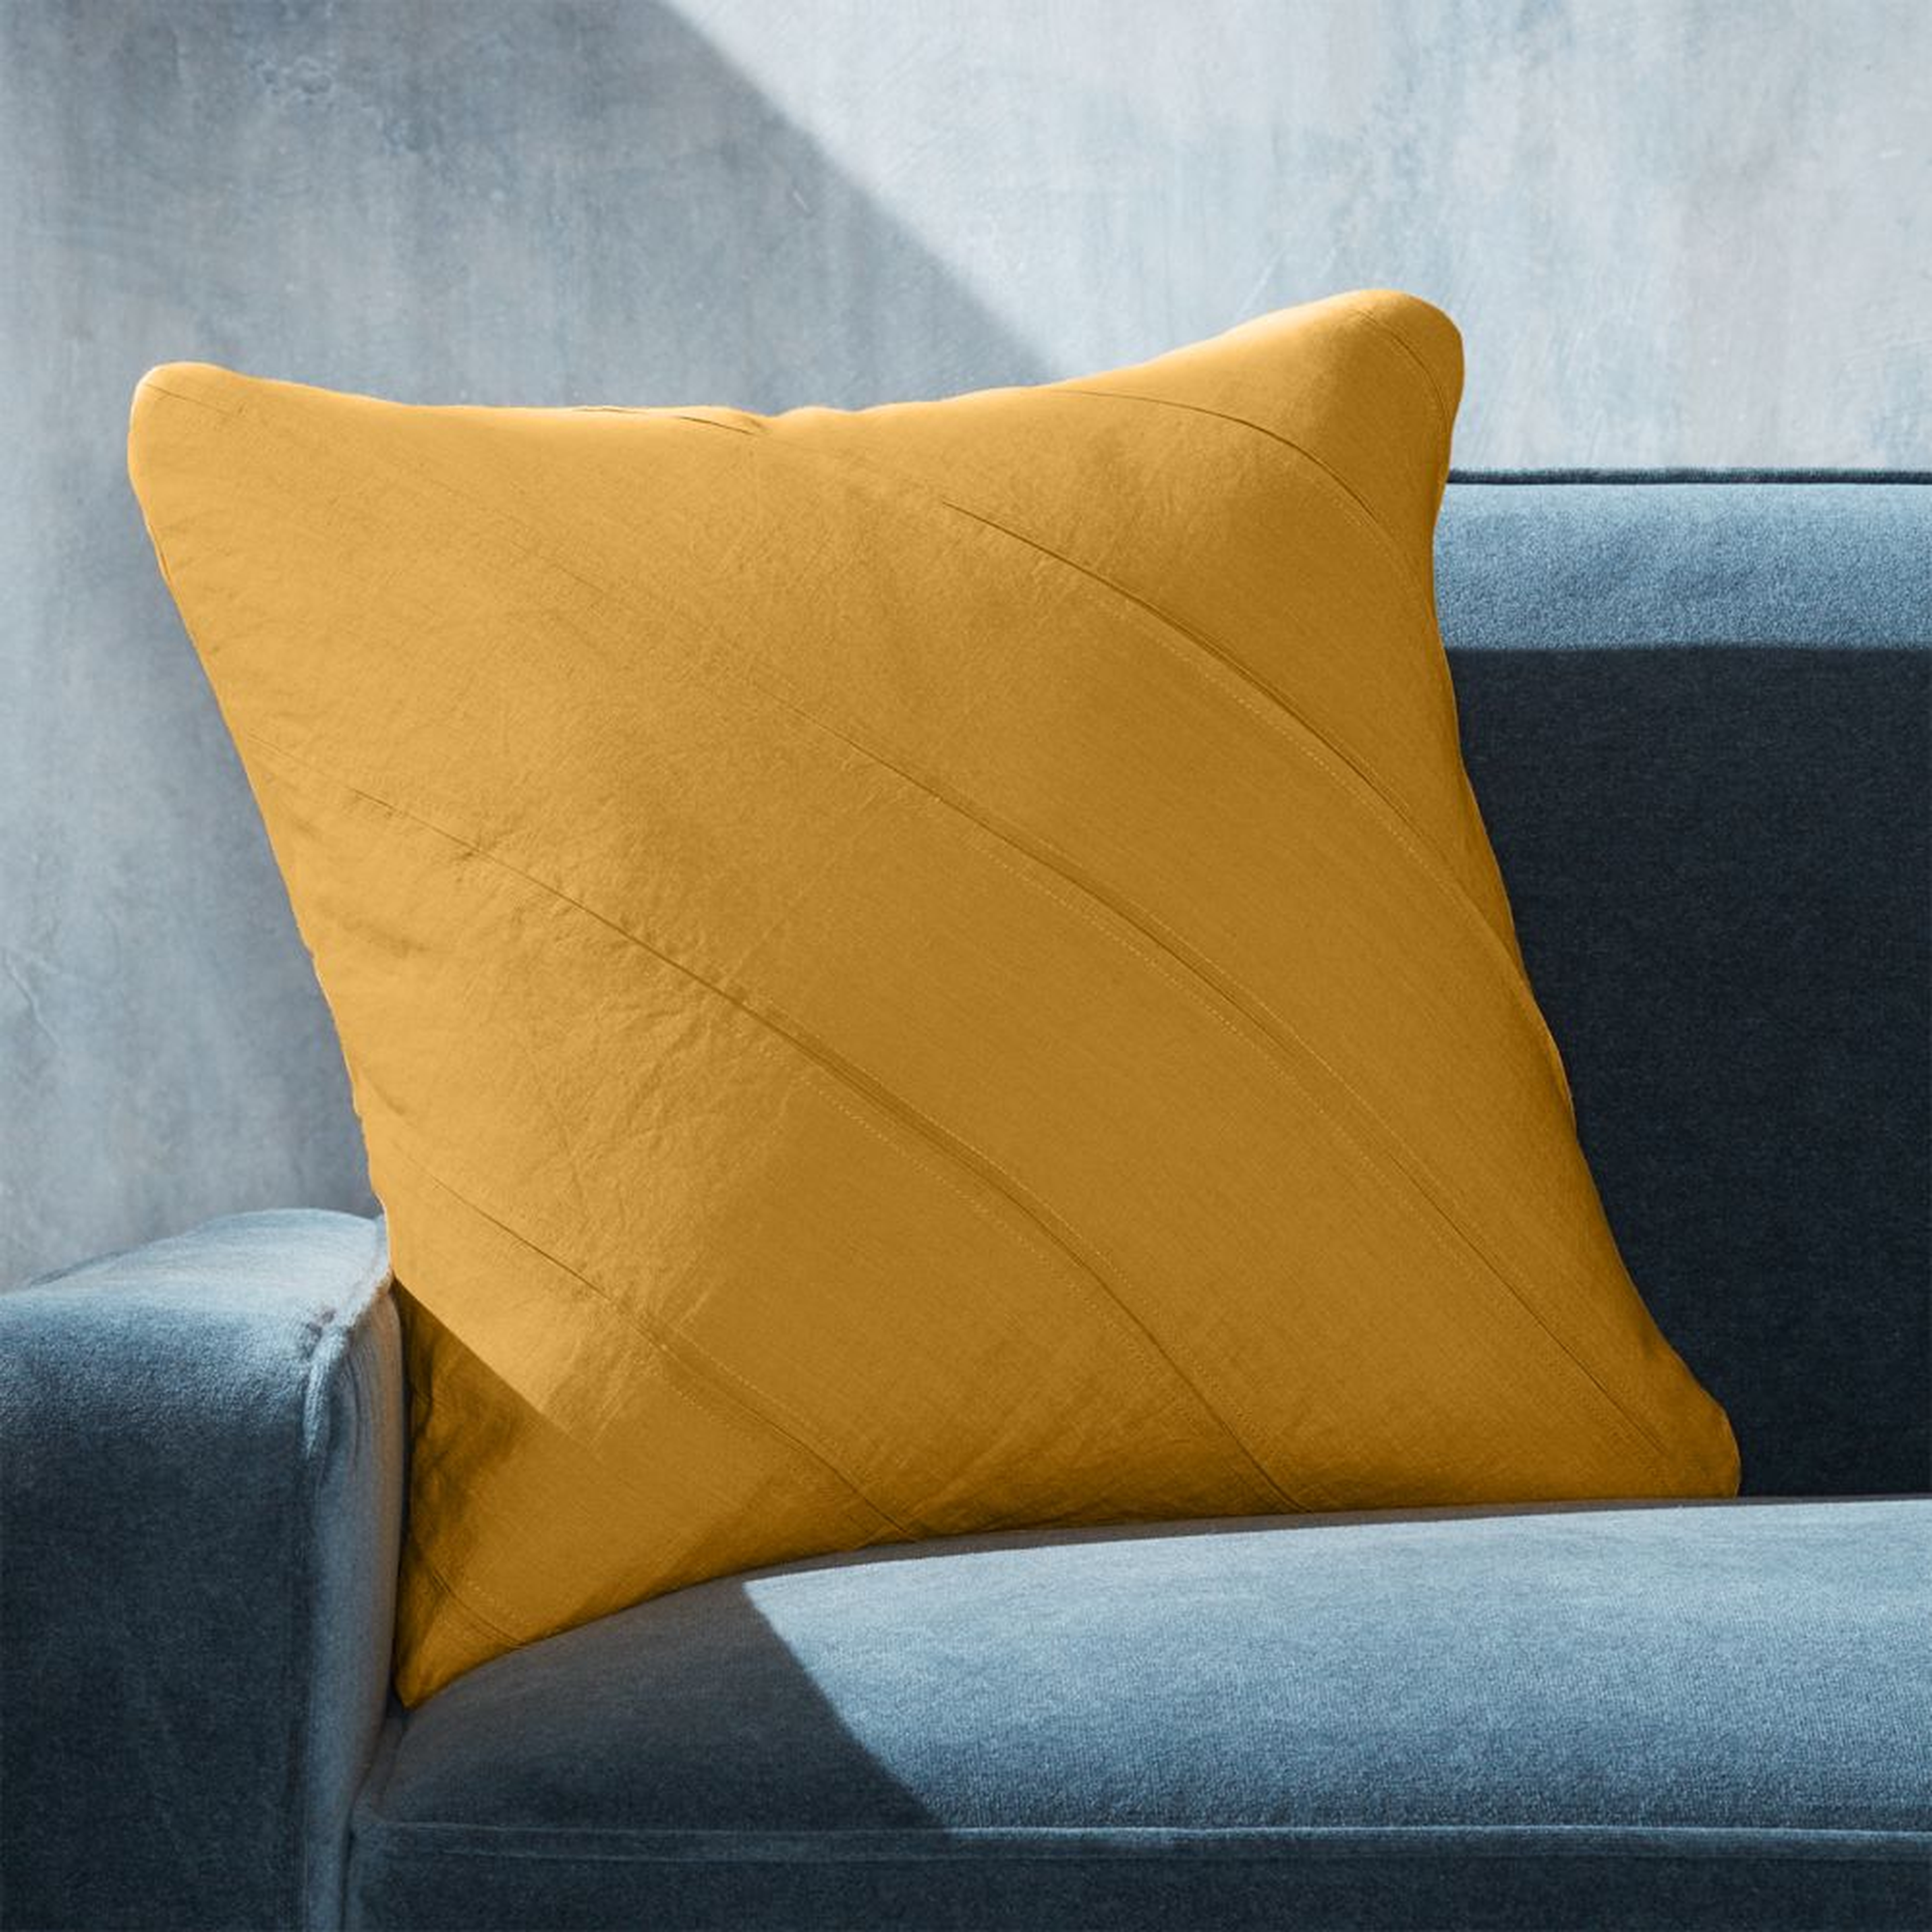 Theta Mustard Linen Pillow with Feather-Down Insert 20" - Crate and Barrel